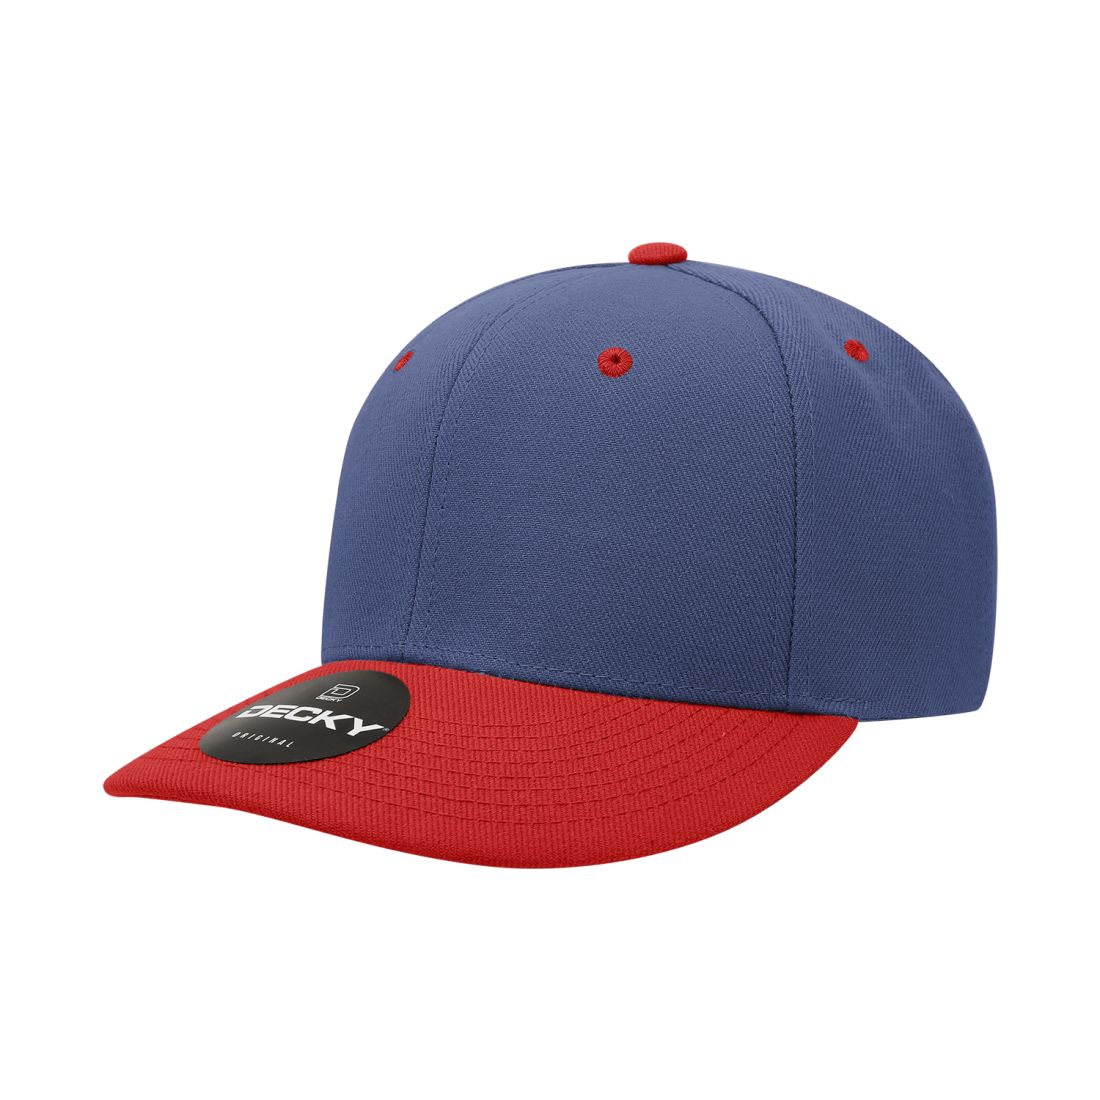 Navy/Red color variant